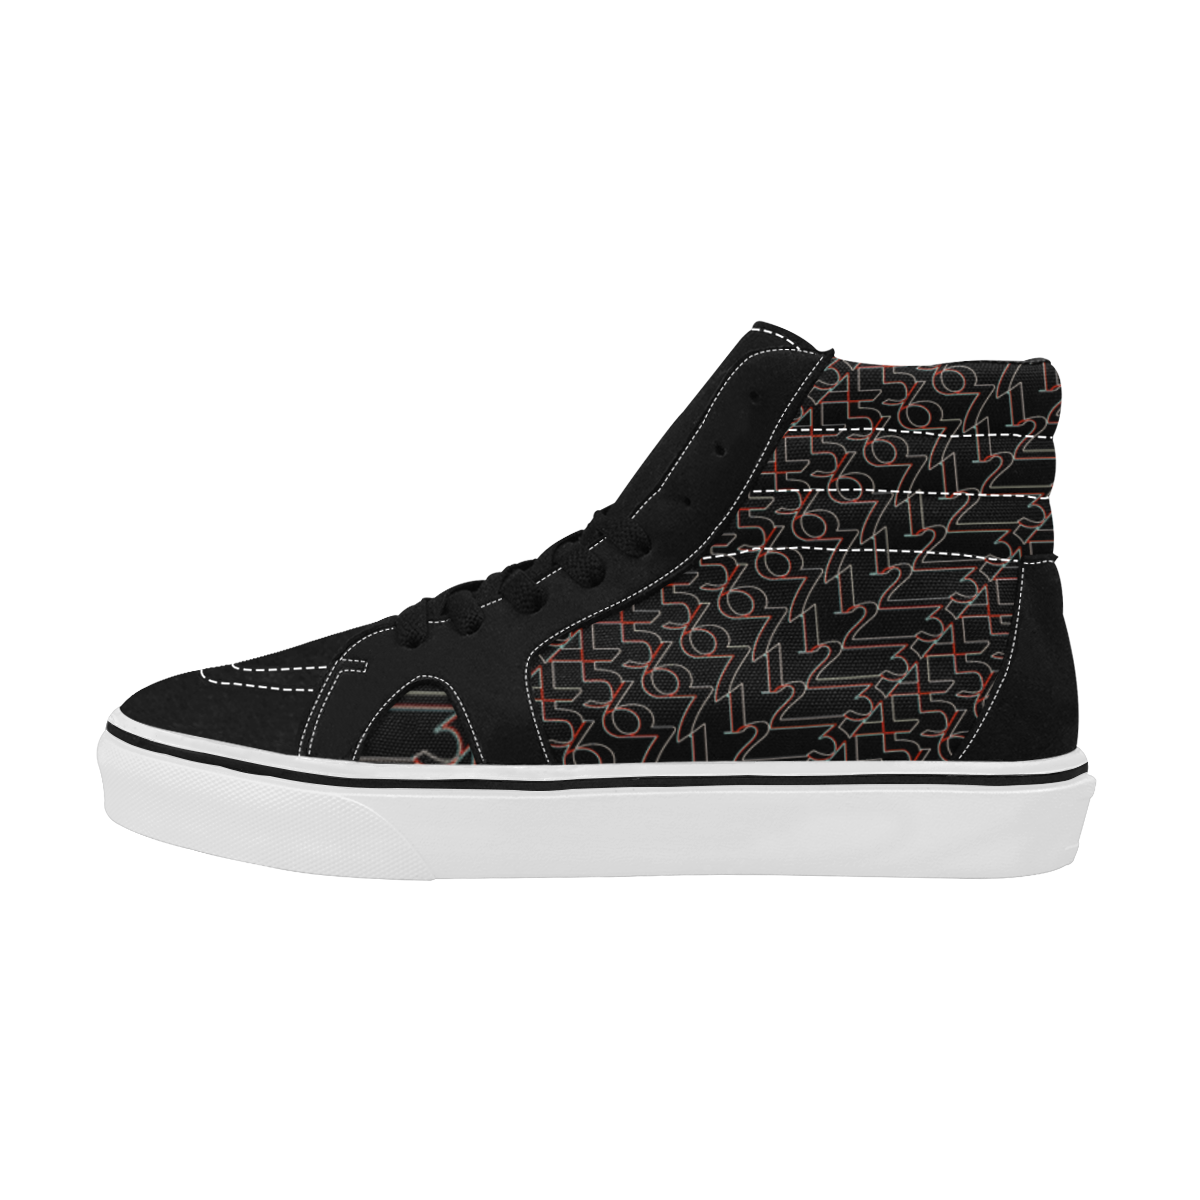 NUMBERS Collection 1234567 Black/Red/White Men's High Top Skateboarding Shoes (Model E001-1)